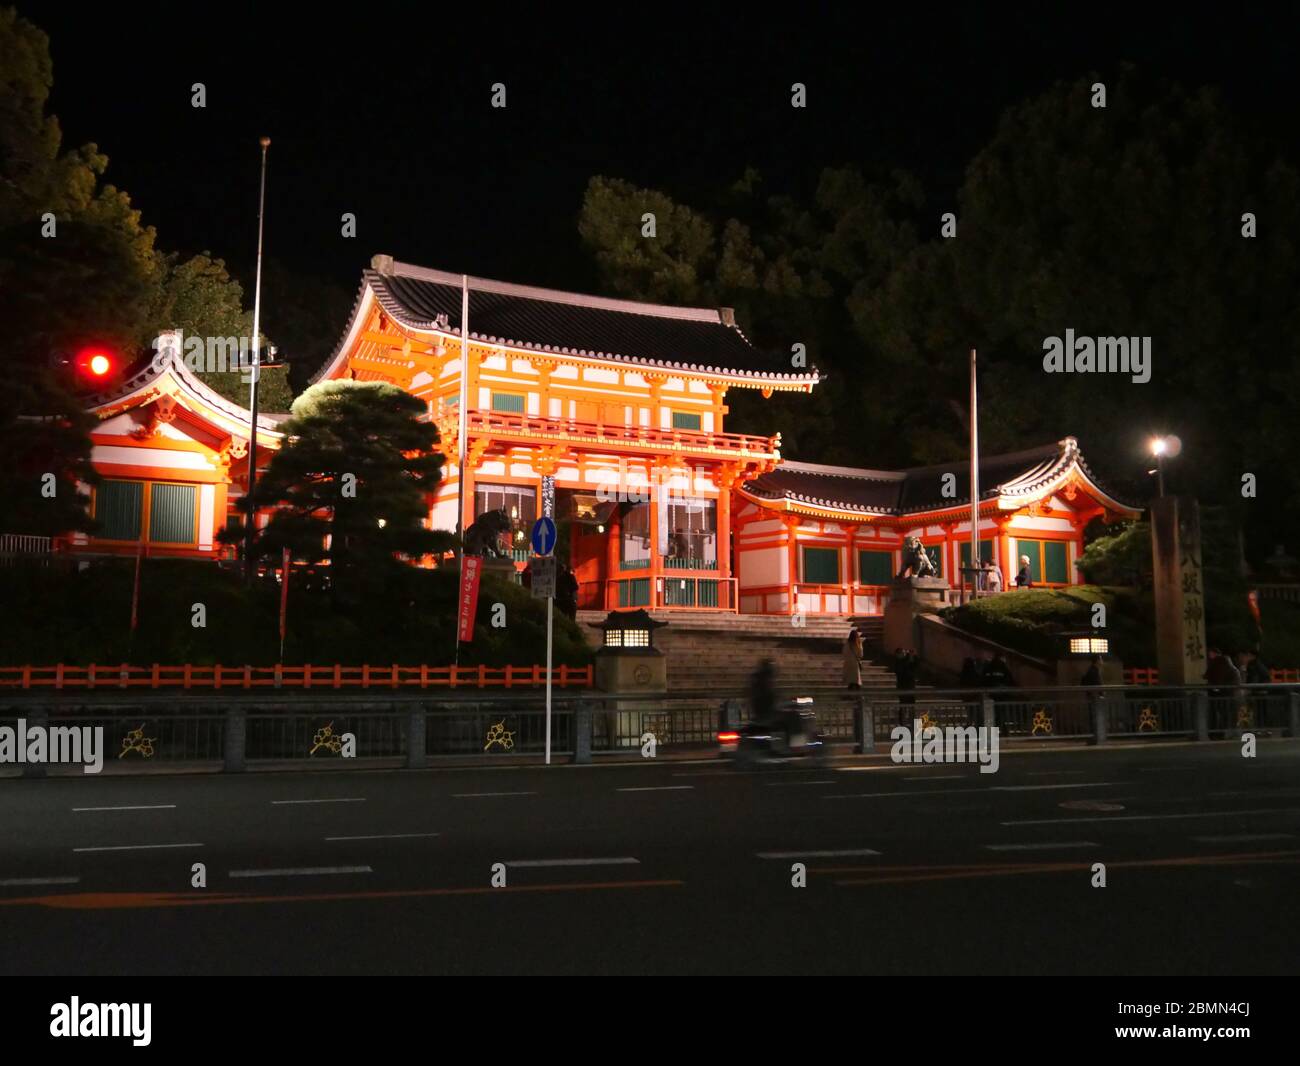 KYOTO, JAPAN - NOVEMBER 06, 2019: A fast moving motorbike in front of the gate of Yasaka Shrine or Gion Shrine in Kyoto at night Stock Photo